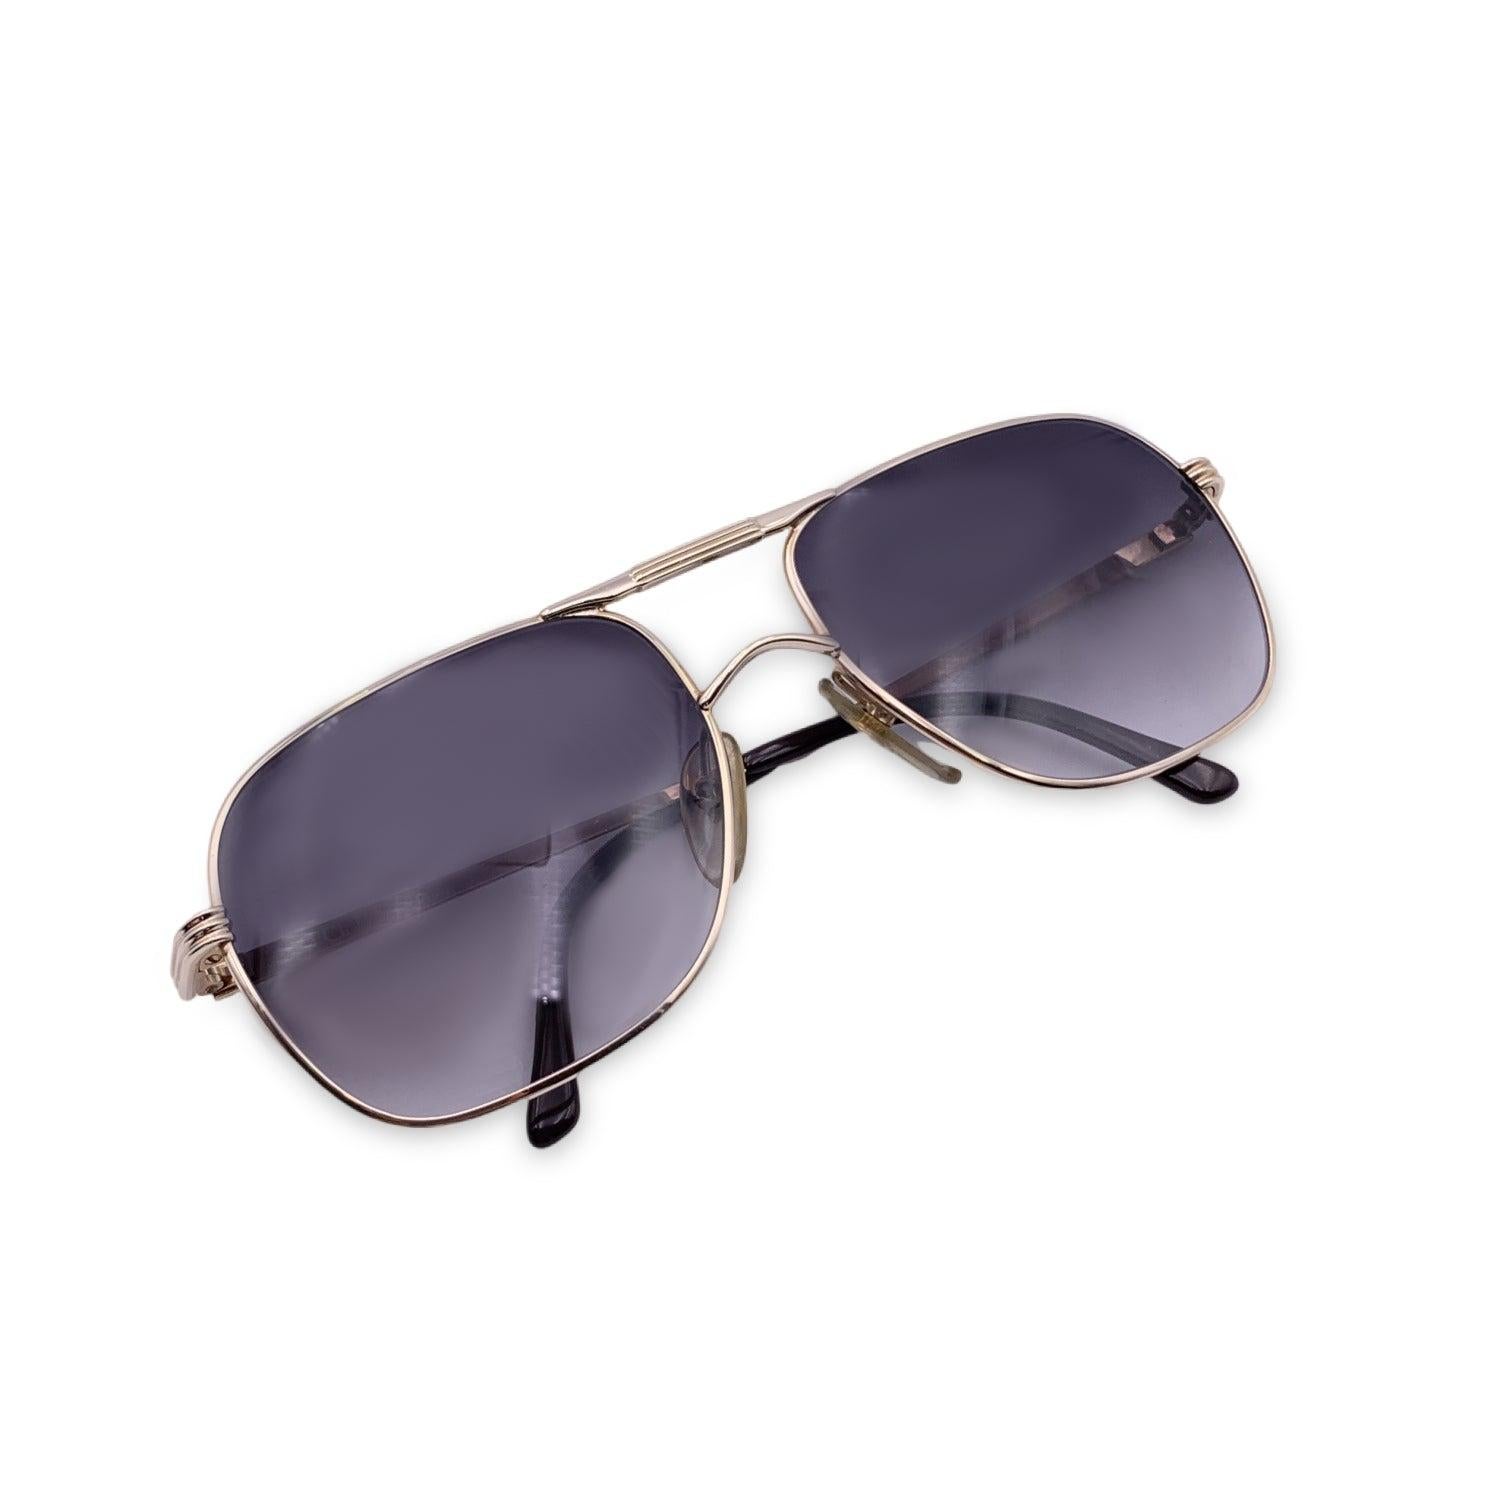 Vintage Christian Dior Monsieur Unisex Sunglasses from the 1980s. Mod. 2443 40. Size: 57/18 130mm. Gold metal frame with dark brown finish. 100% Total UVA/UVB protection grey gradient lenses. CD logos on the sides of the temples. Details MATERIAL: